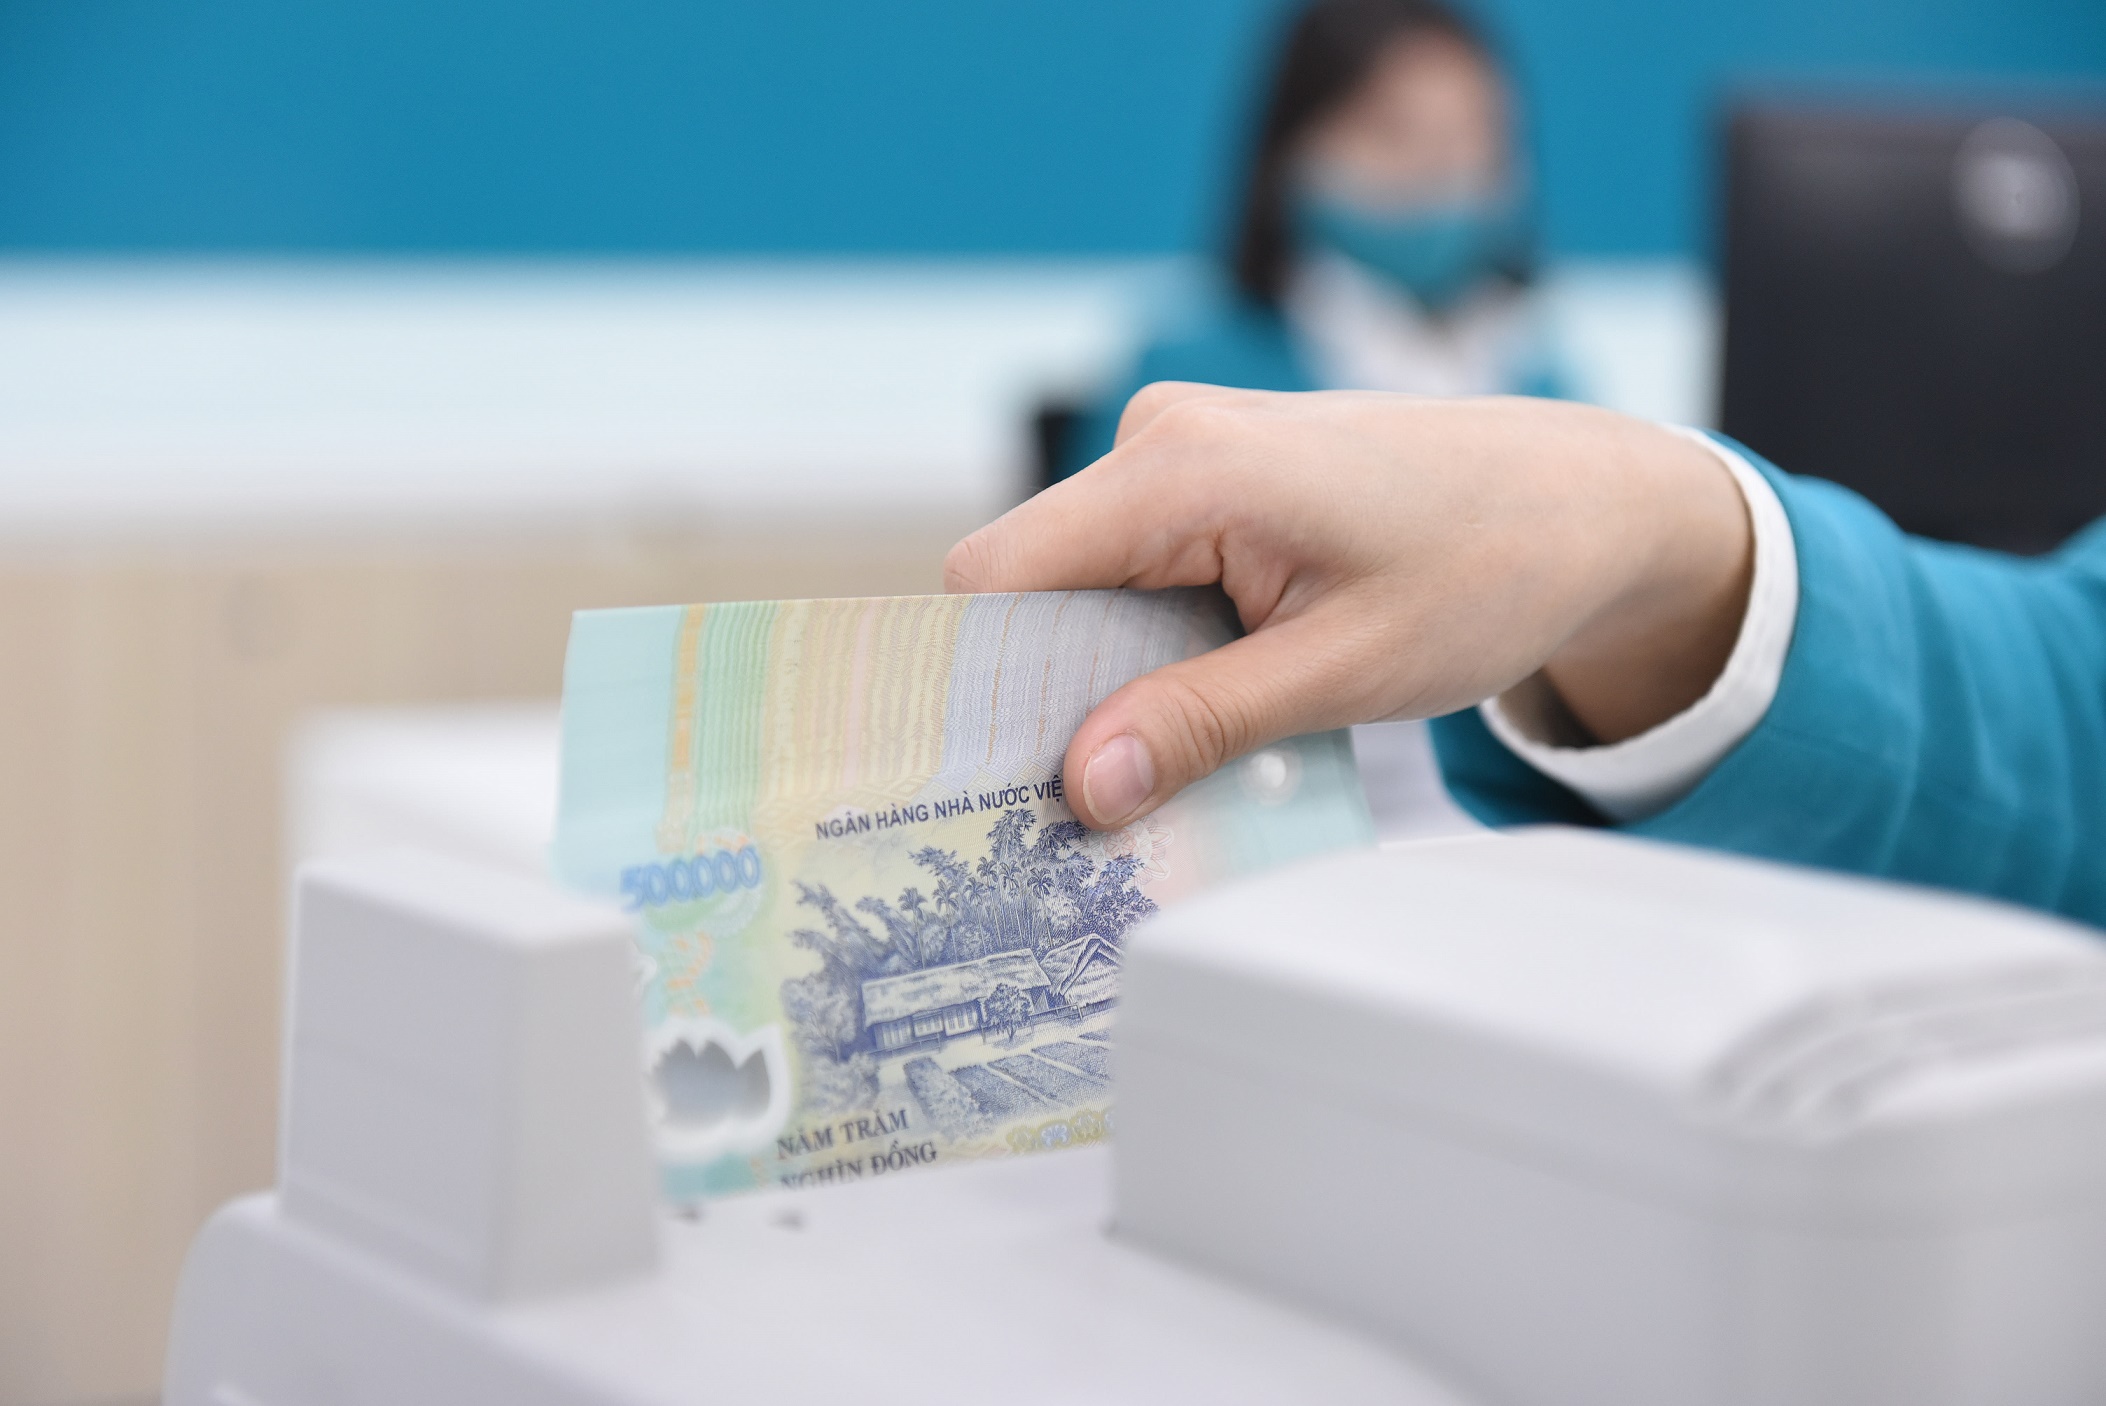 Enterprises, business households in Vietnam entitled to loan interest rate support of 2% per year